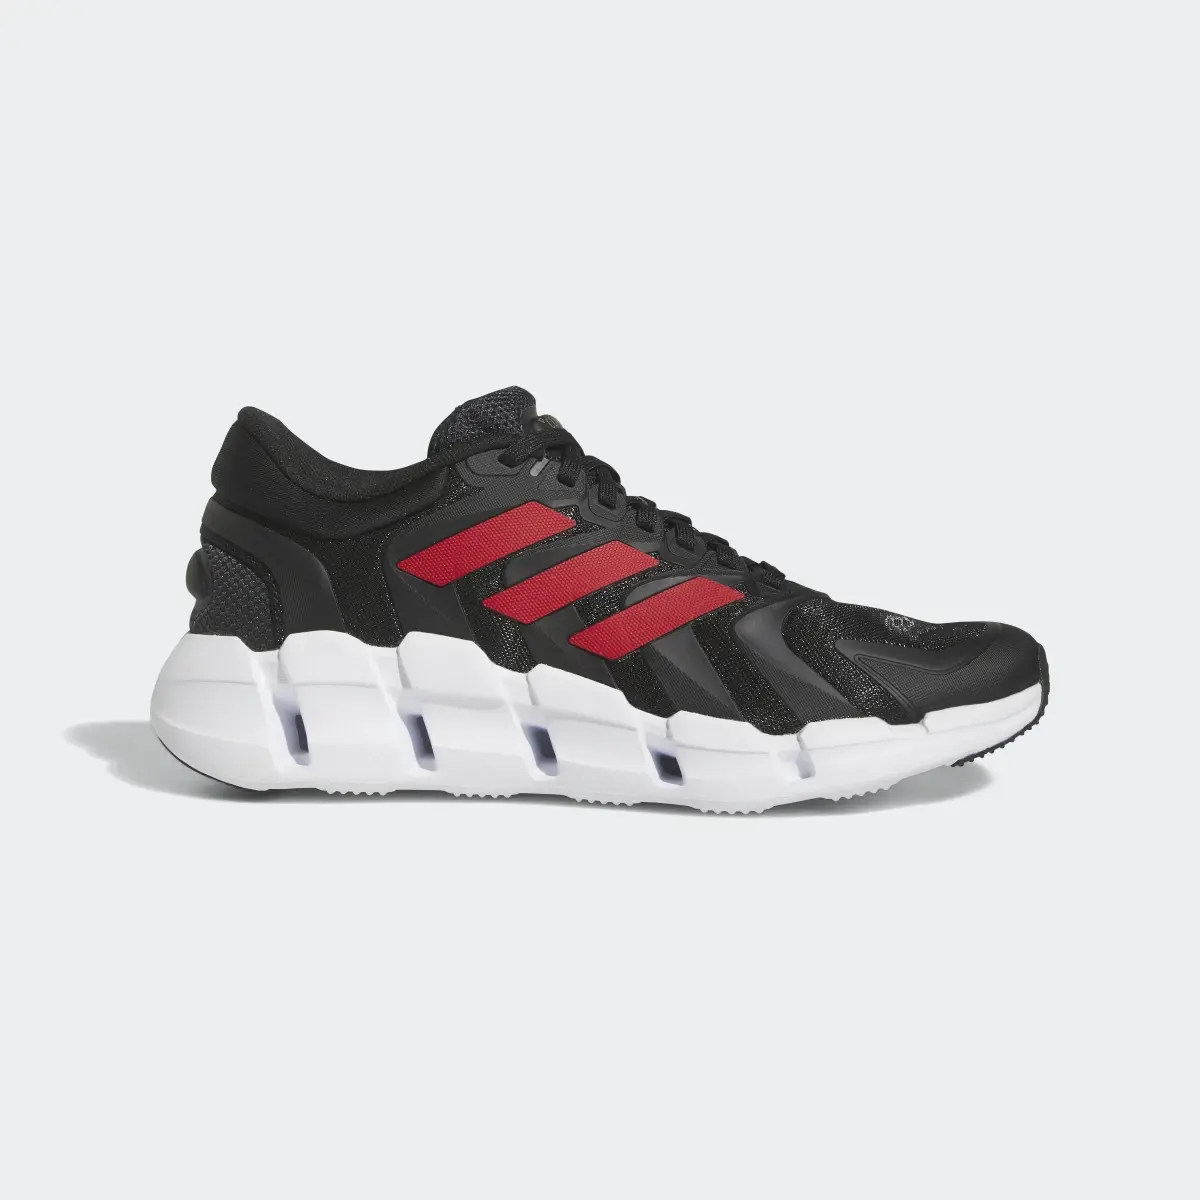 Adidas Chaussure Climacool Ventice. 2